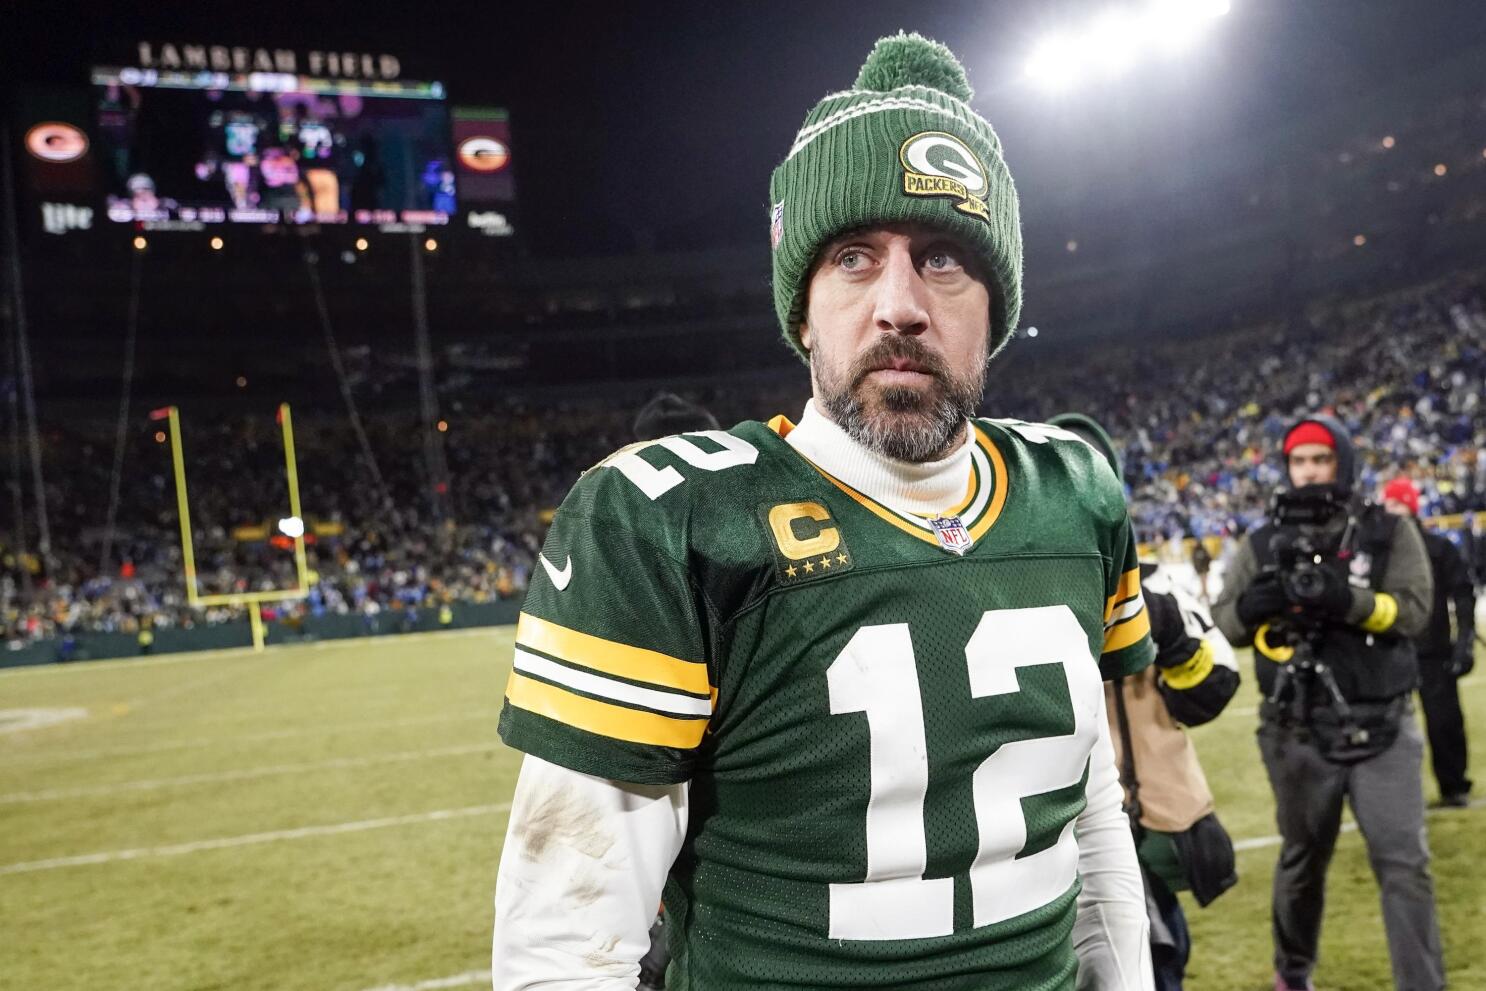 Aaron Rodgers hopes to have decision “sooner rather than later”